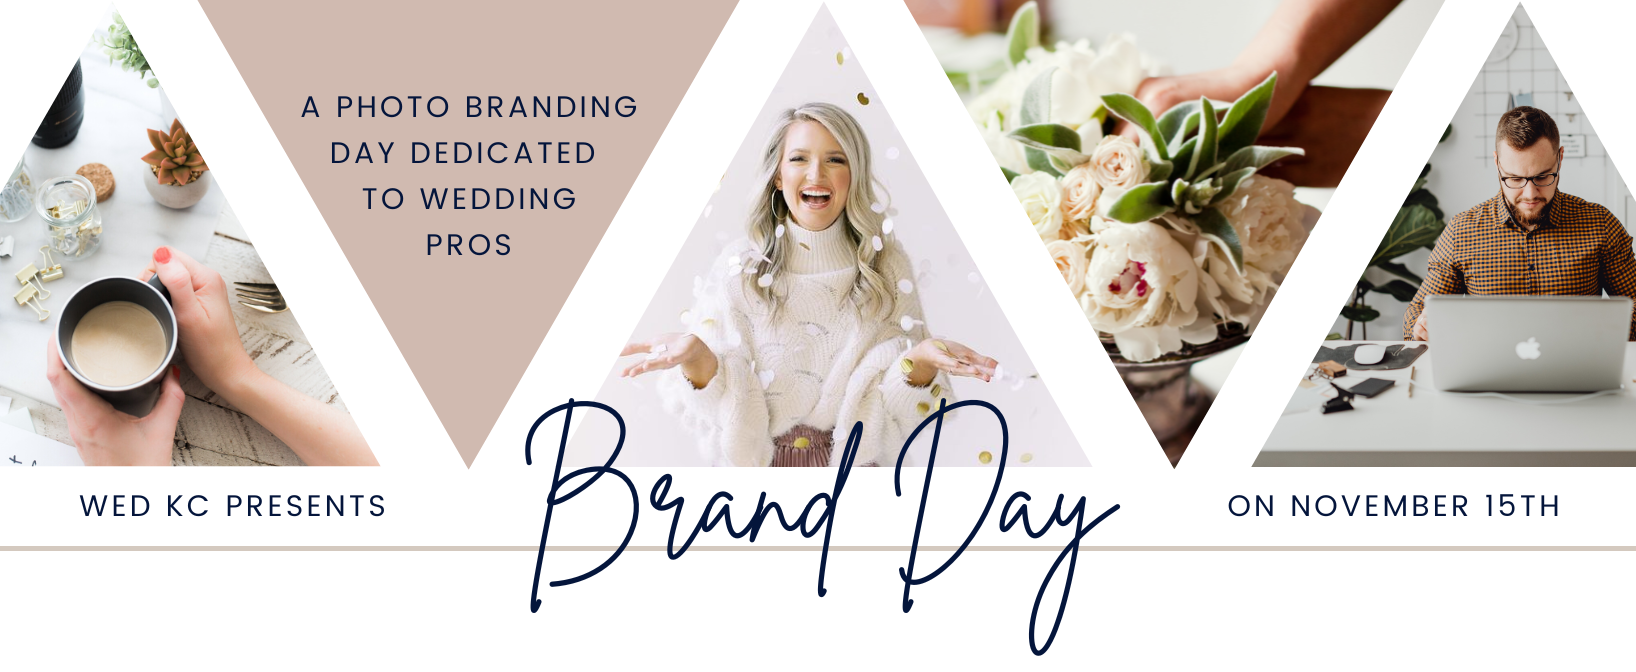 Wed KC Brand Day